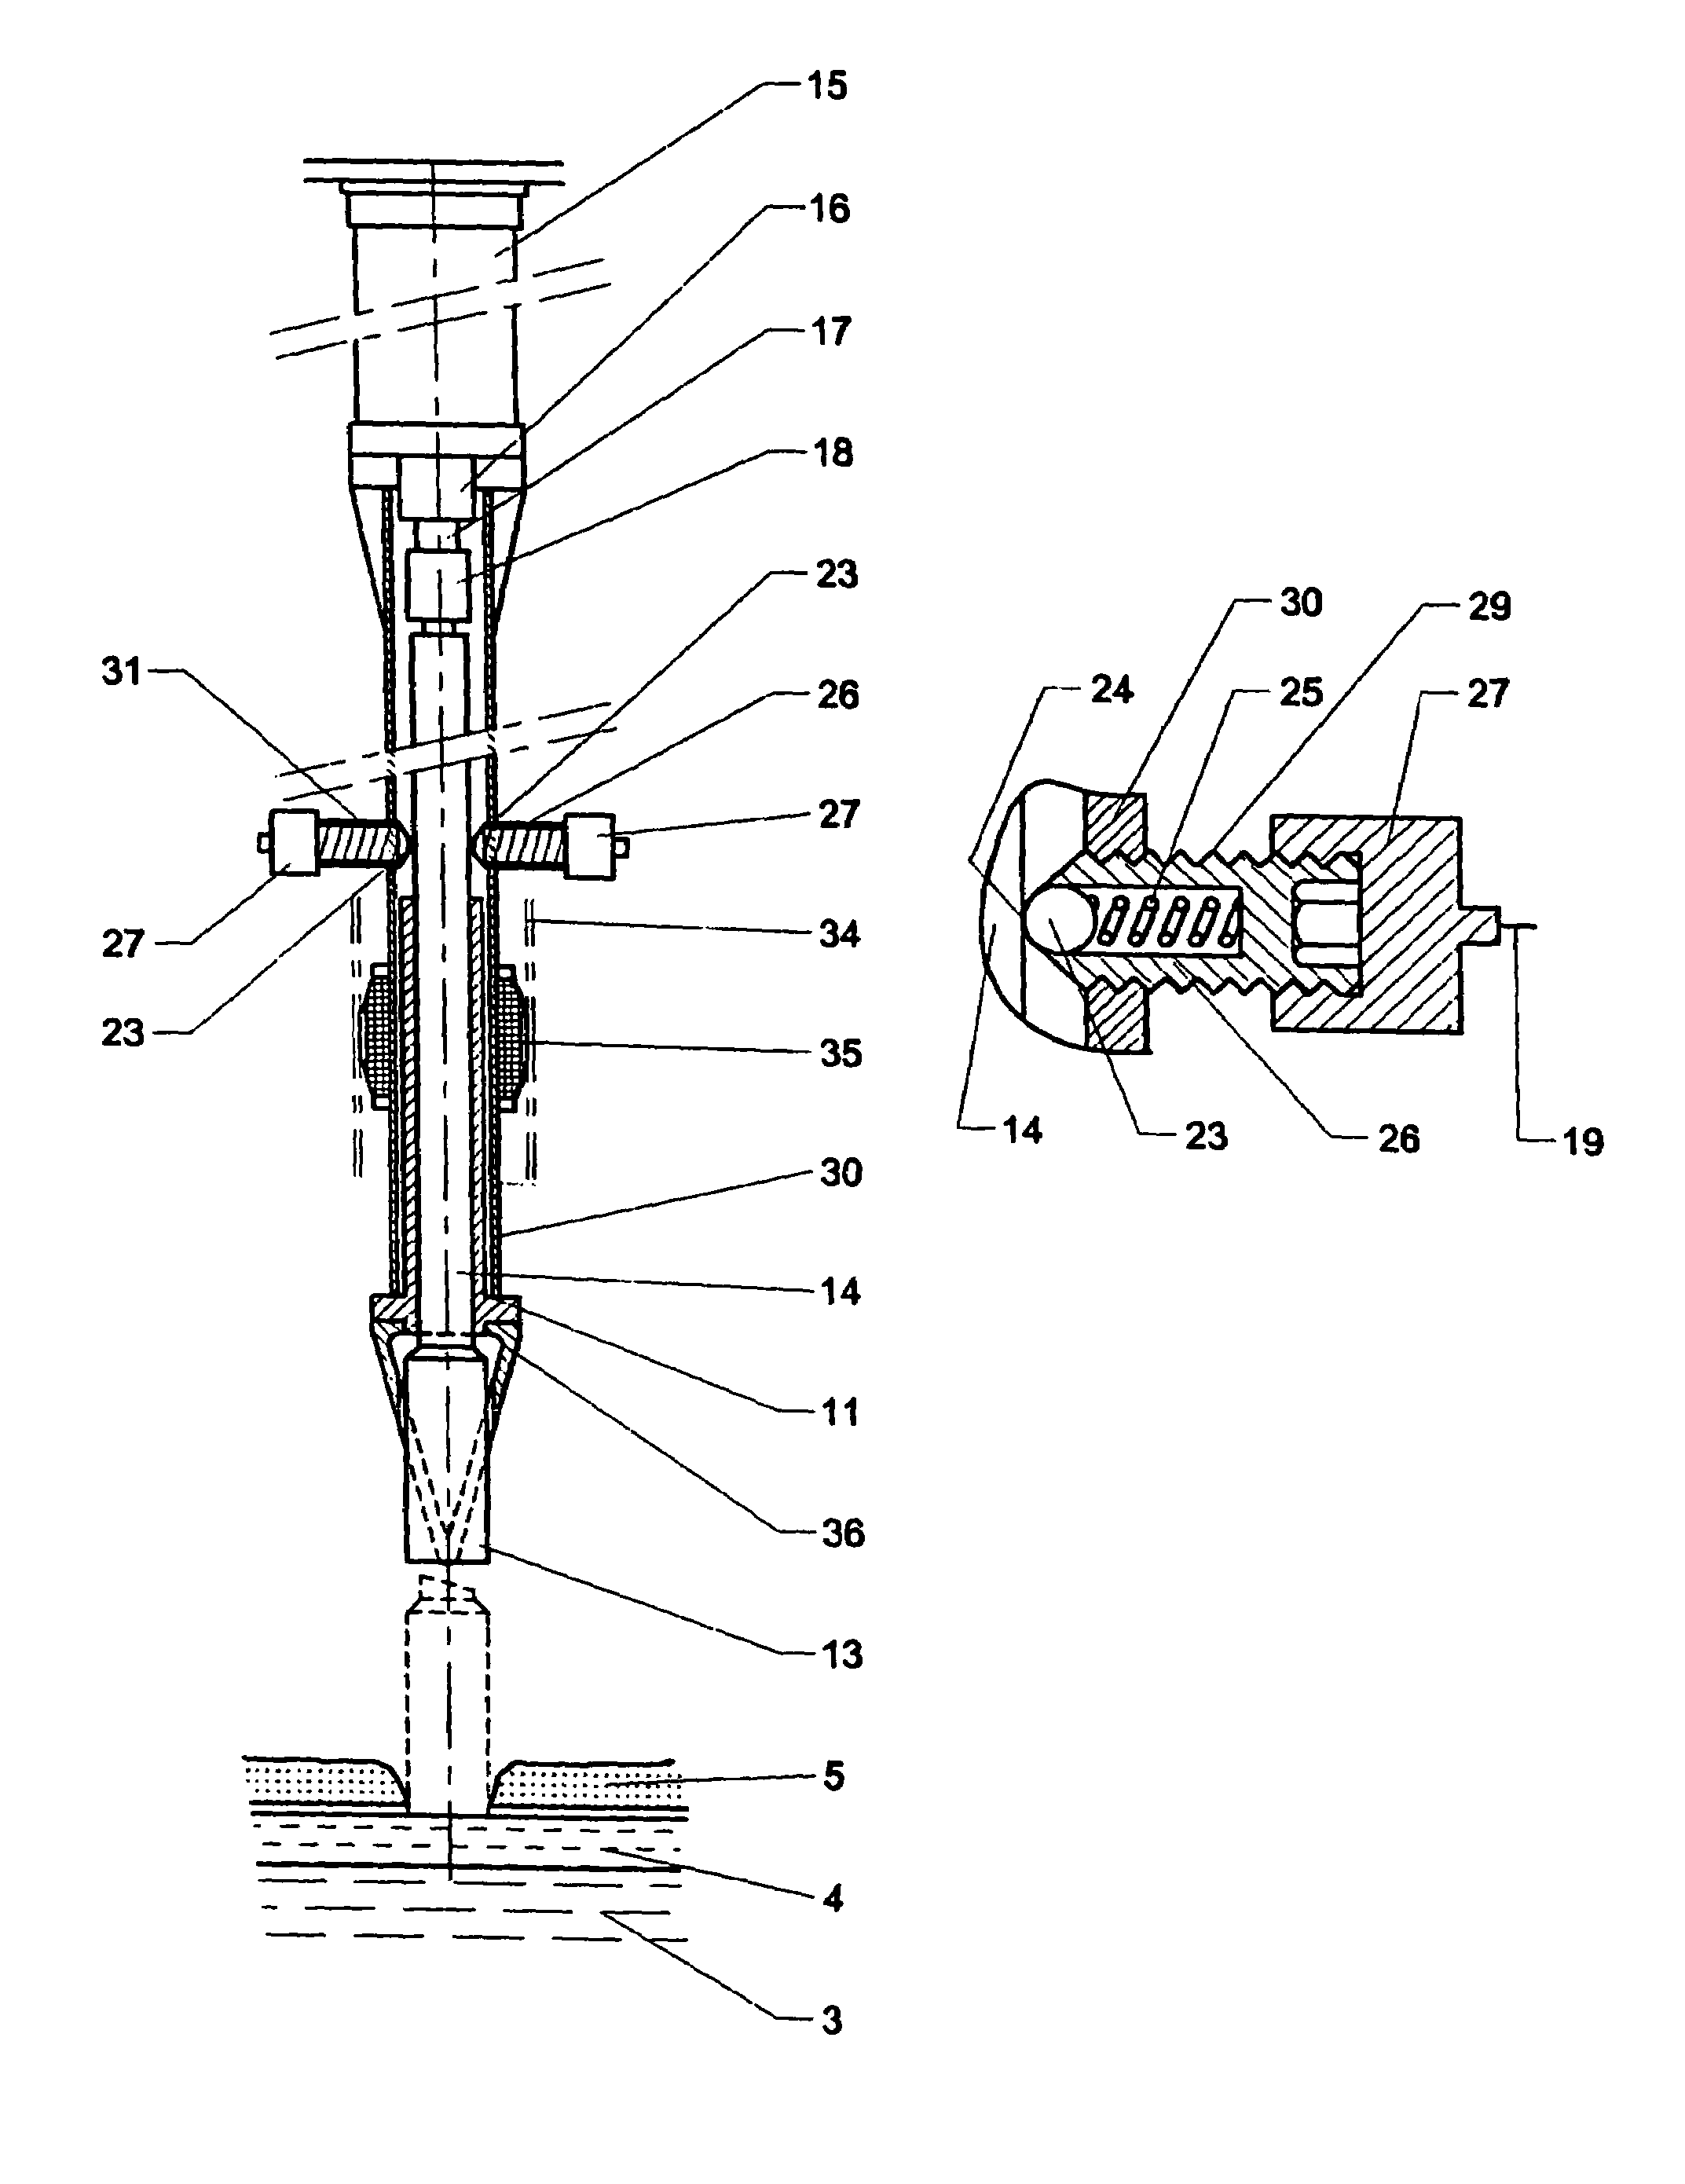 Device for controlling the travel distance of a chisel in a feeding system for an aluminium production electrolytic cell